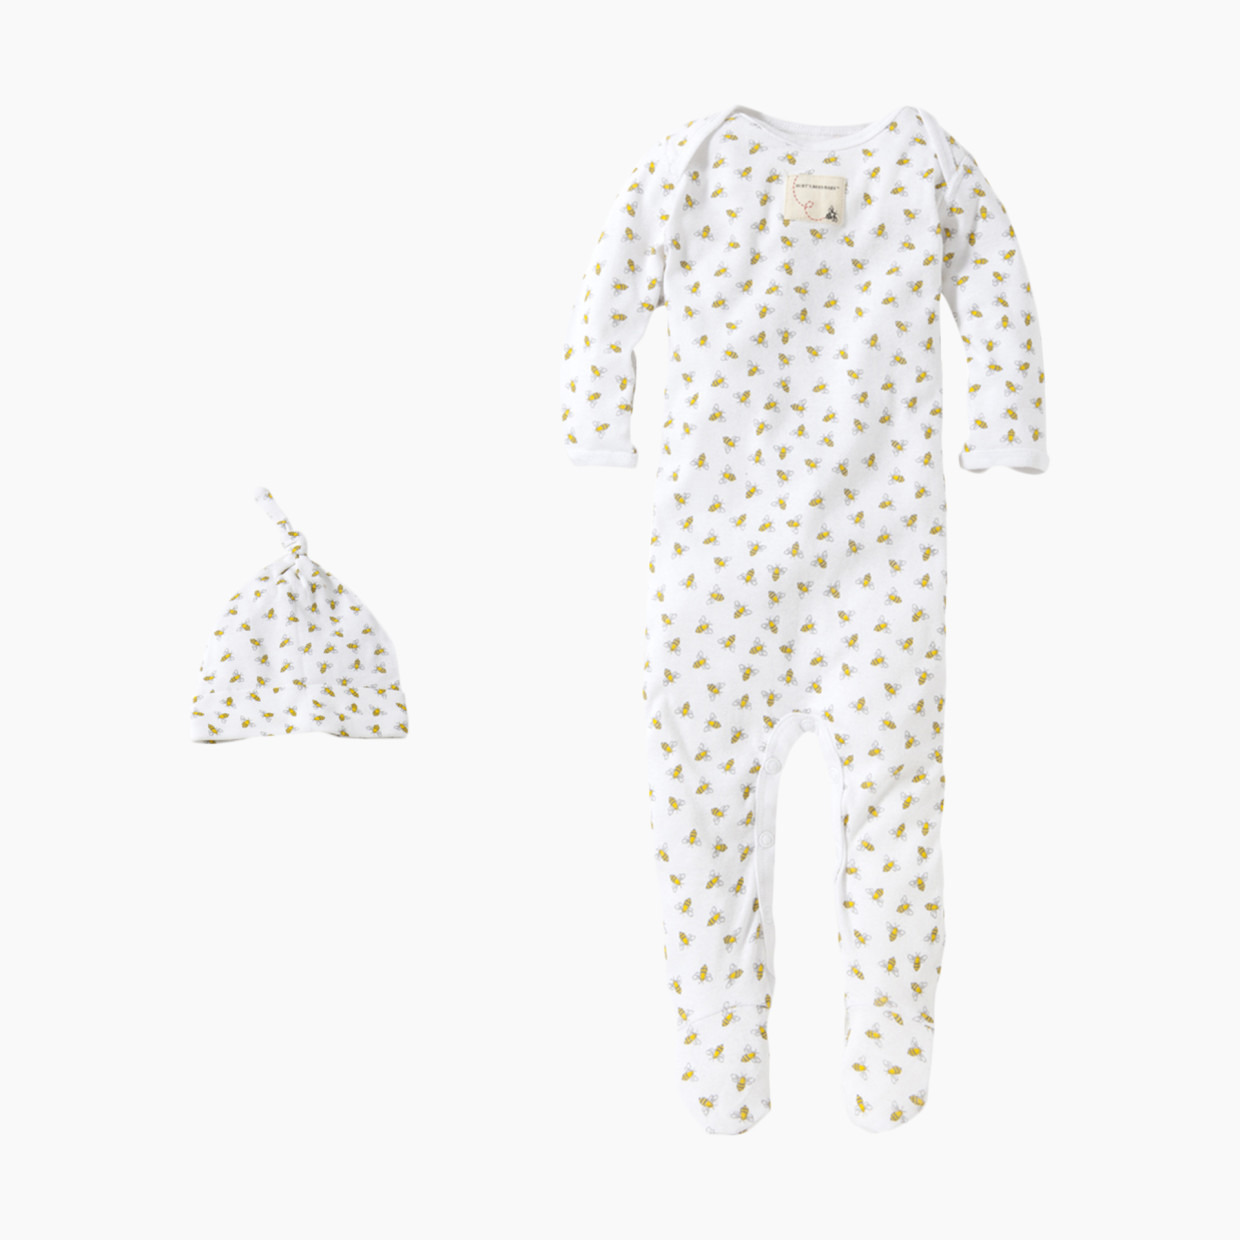 Burt's Bees Baby Organic Footed Coverall & Knot Top Hat - Cloud Honeybee, 6-9 Months.